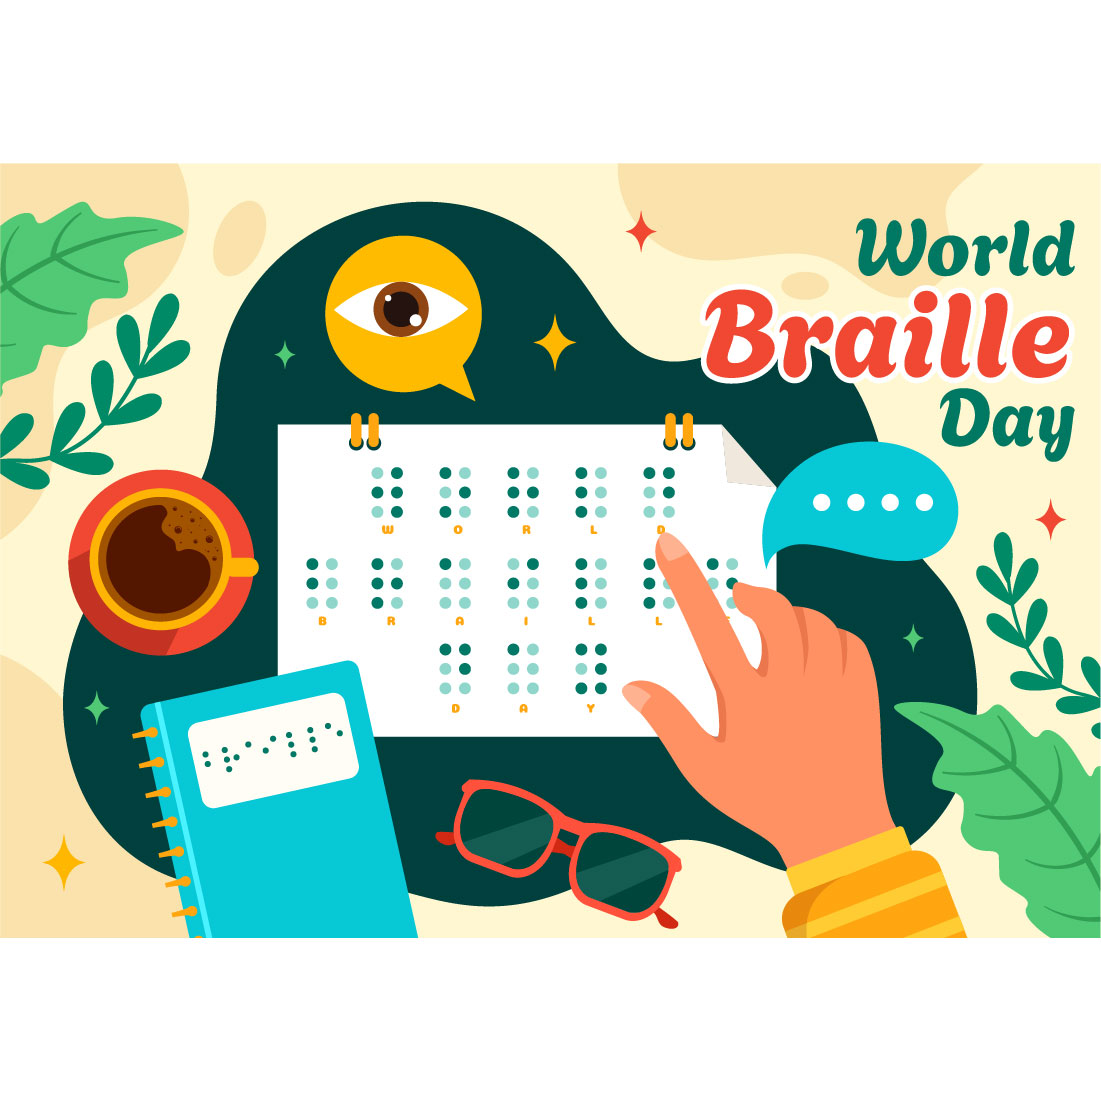 12 World Braille Day Illustration preview image.